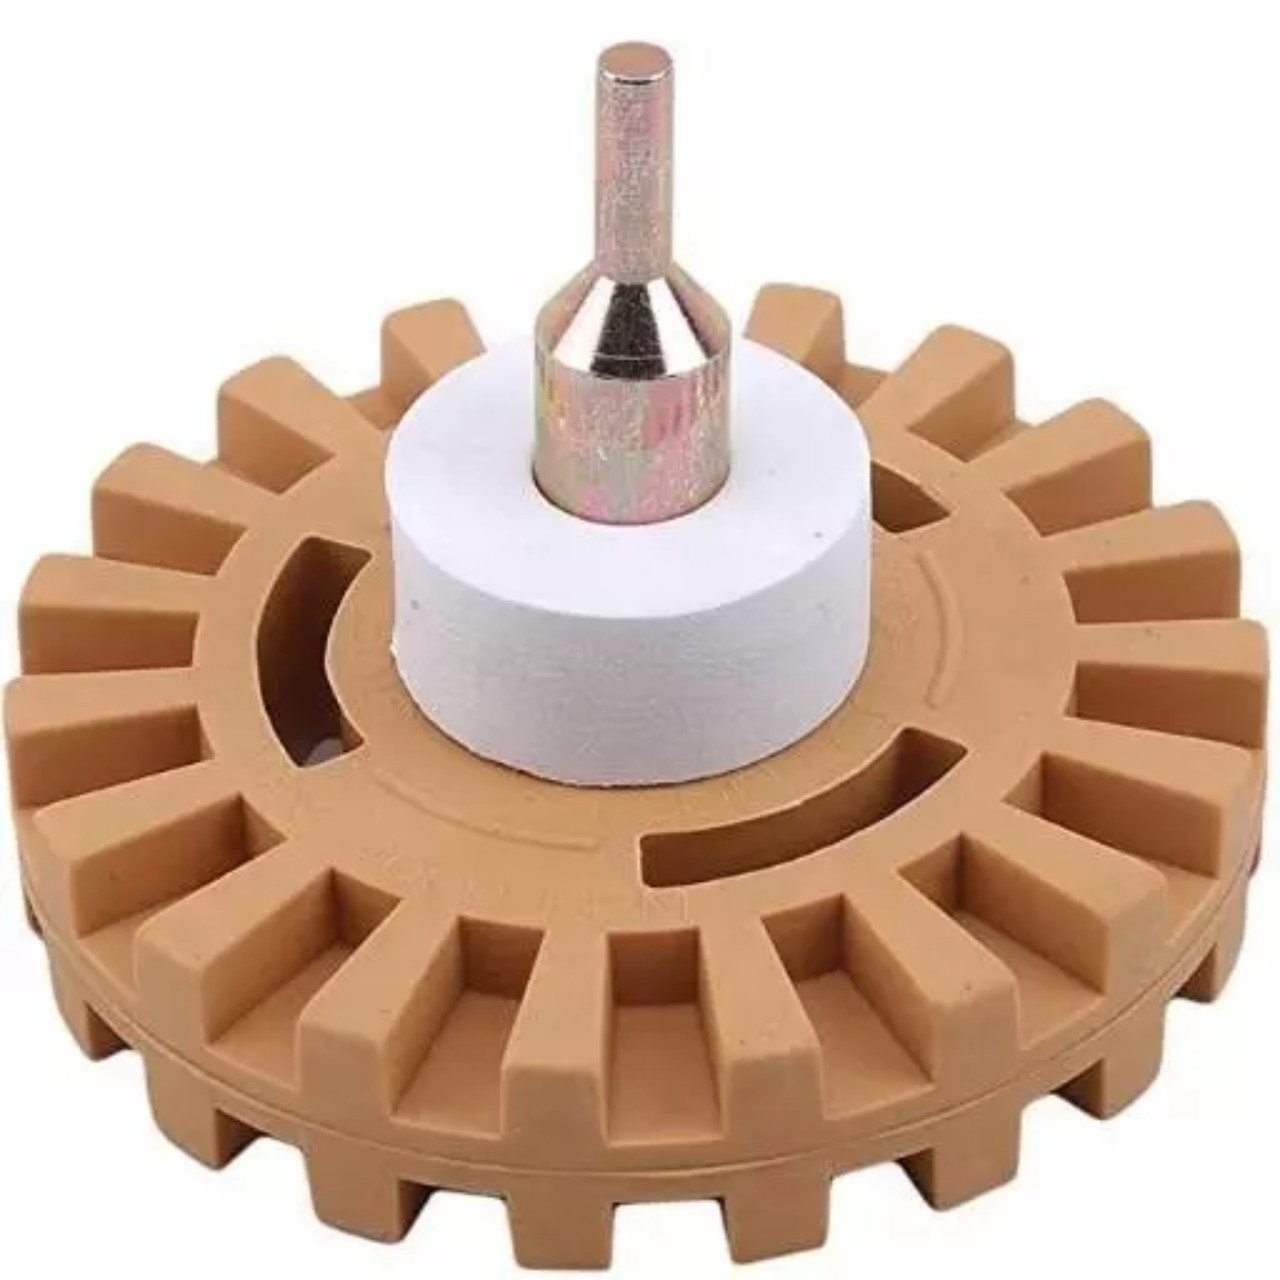 2pcs Eraser Wheel Sticker Remover Tool Detailing Supply Glue Remover for Car, Size: 10.00X10.00X2.00CM, Brown